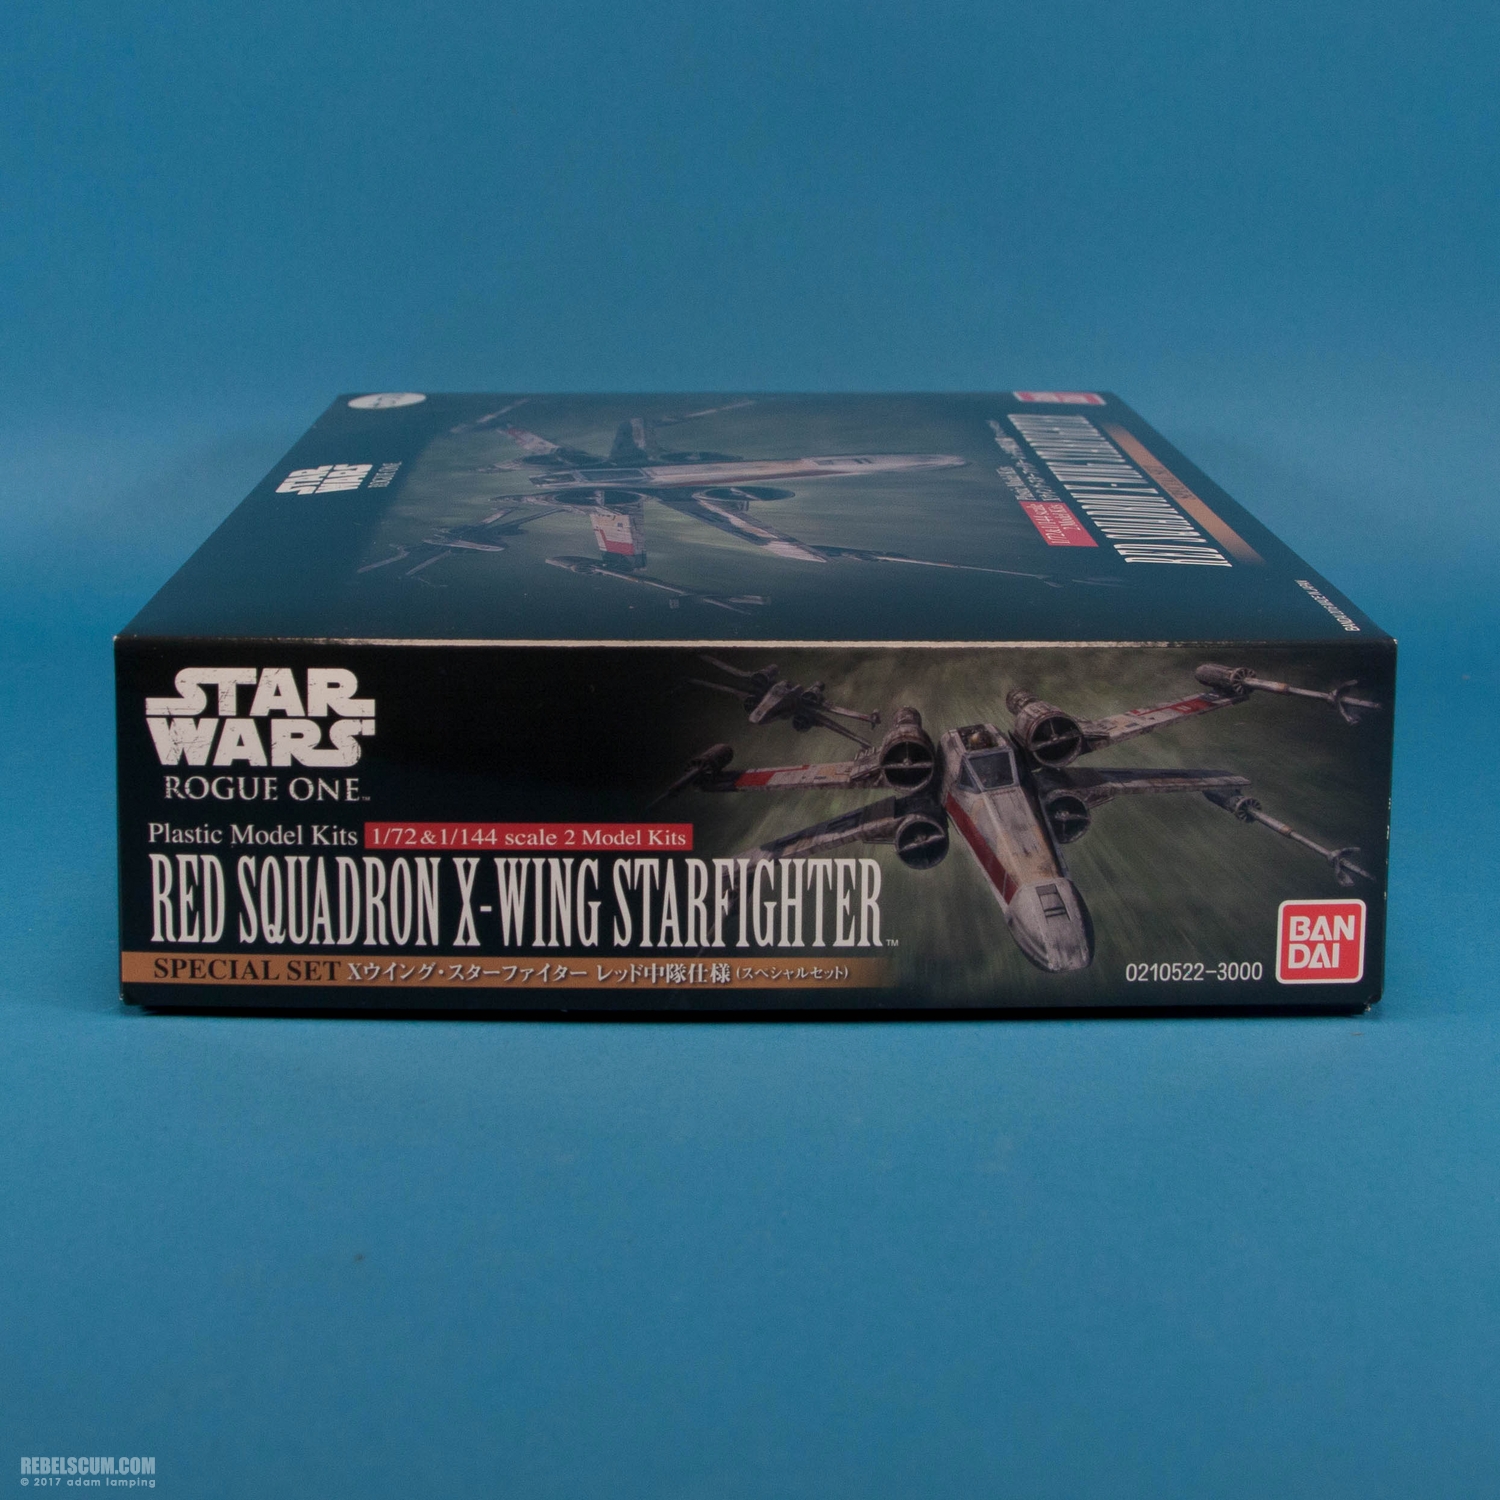 bandai-red-squadron-x-wing-starfighter-scale-model-kit-039.jpg